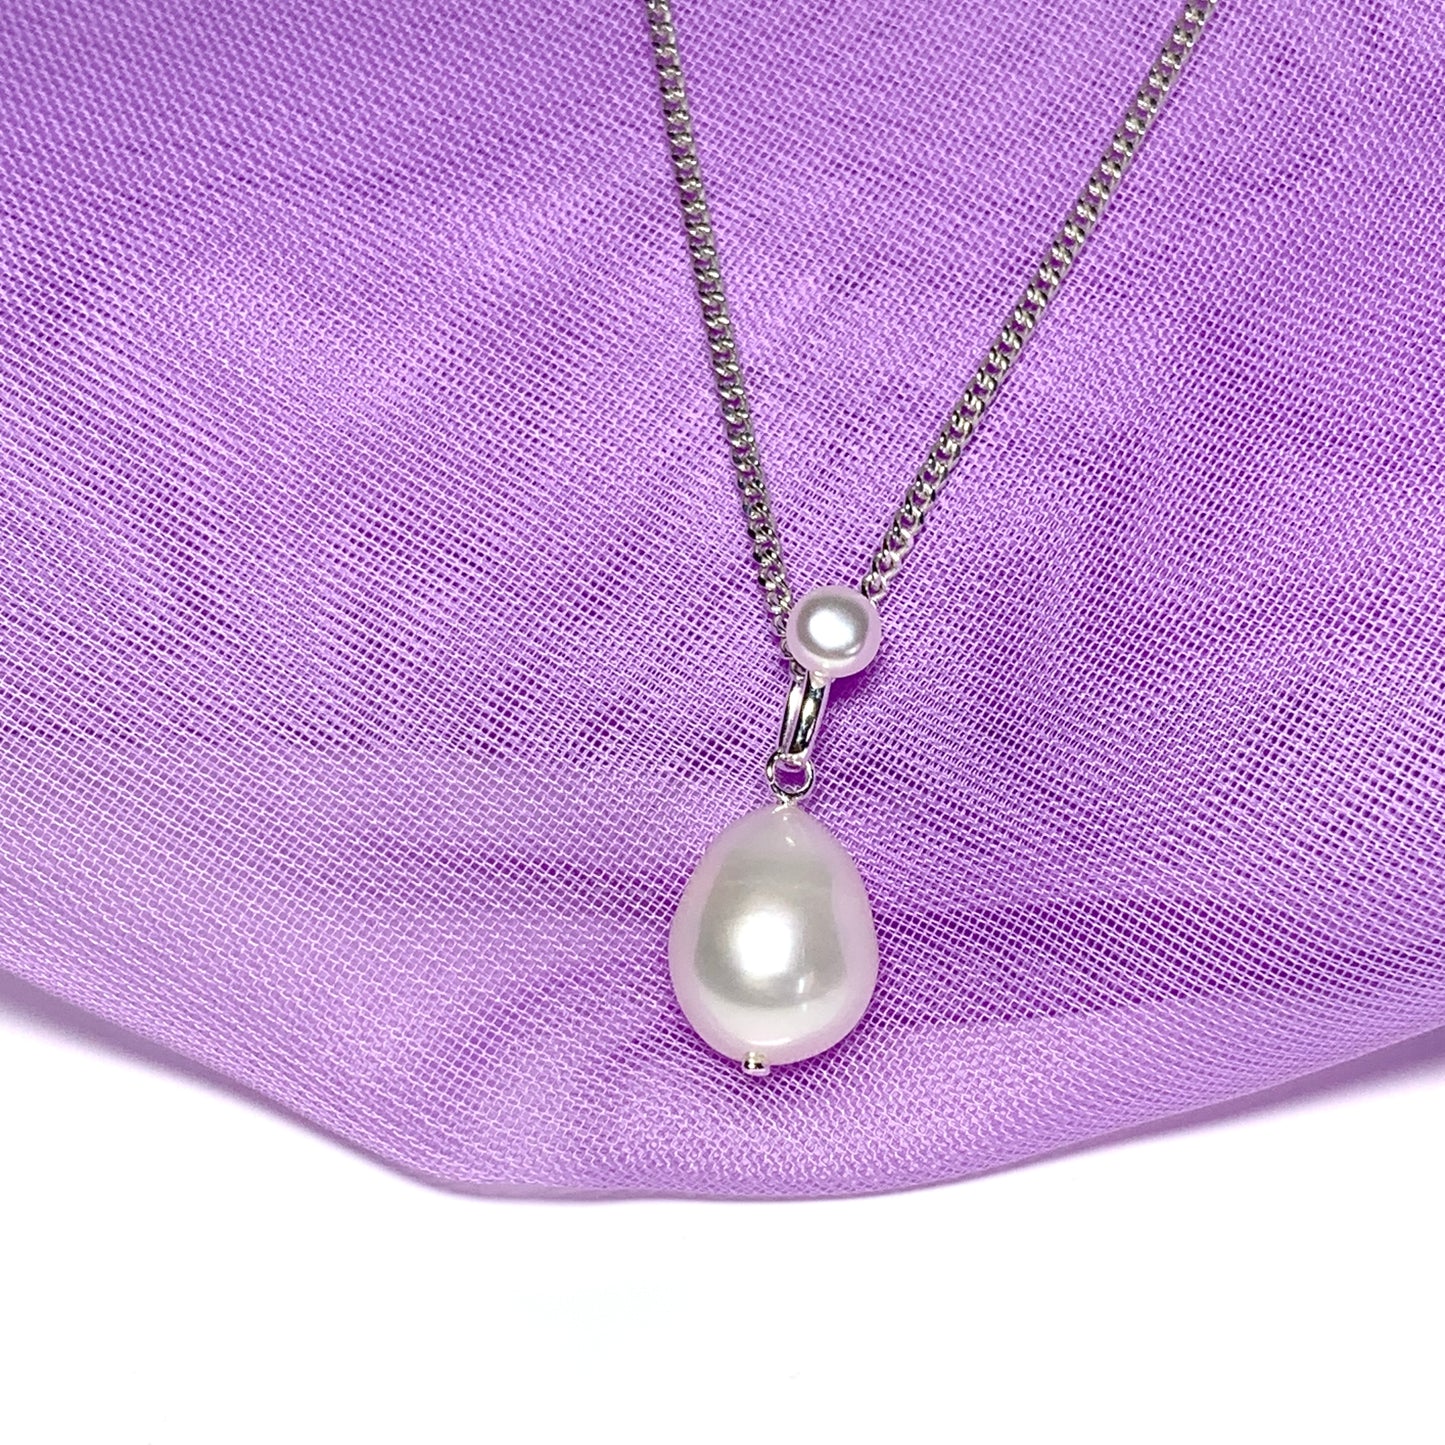 Real freshwater pearl double necklace